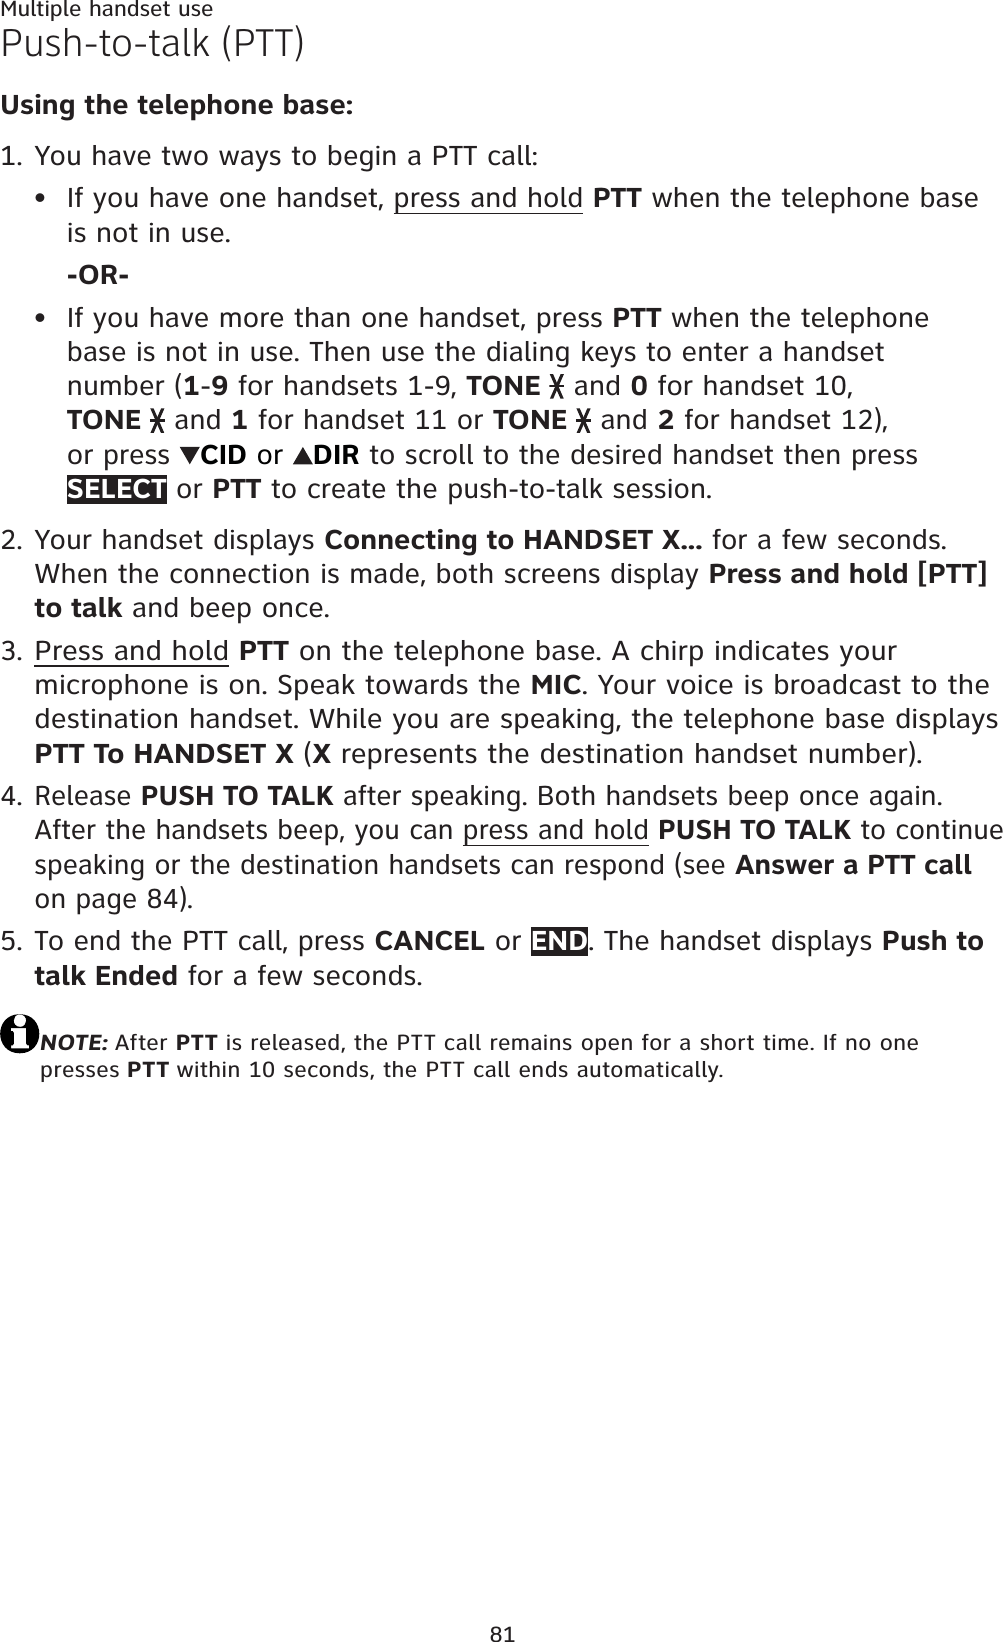 81Multiple handset usePush-to-talk (PTT)Using the telephone base:You have two ways to begin a PTT call:If you have one handset, press and hold PTT when the telephone baseis not in use.-OR-If you have more than one handset, press PTT when the telephone base is not in use. Then use the dialing keys to enter a handset number (1-9 for handsets 1-9, TONE  and 0 for handset 10, TONE  and 1 for handset 11 or TONE  and 2 for handset 12), or press  CID or  DIR to scroll to the desired handset then press SELECT or PTT to create the push-to-talk session.Your handset displays Connecting to HANDSET X... for a few seconds. When the connection is made, both screens display Press and hold [PTT] to talk and beep once.Press and hold PTT on the telephone base. A chirp indicates your microphone is on. Speak towards the MIC. Your voice is broadcast to the destination handset. While you are speaking, the telephone base displays PTT To HANDSET X (X represents the destination handset number).Release PUSH TO TALK after speaking. Both handsets beep once again. After the handsets beep, you can press and hold PUSH TO TALK to continue speaking or the destination handsets can respond (see Answer a PTT callon page 84).To end the PTT call, press CANCEL or END. The handset displays Push to talk Ended for a few seconds.NOTE: After PTT is released, the PTT call remains open for a short time. If no one presses PTT within 10 seconds, the PTT call ends automatically.1.••2.3.4.5.